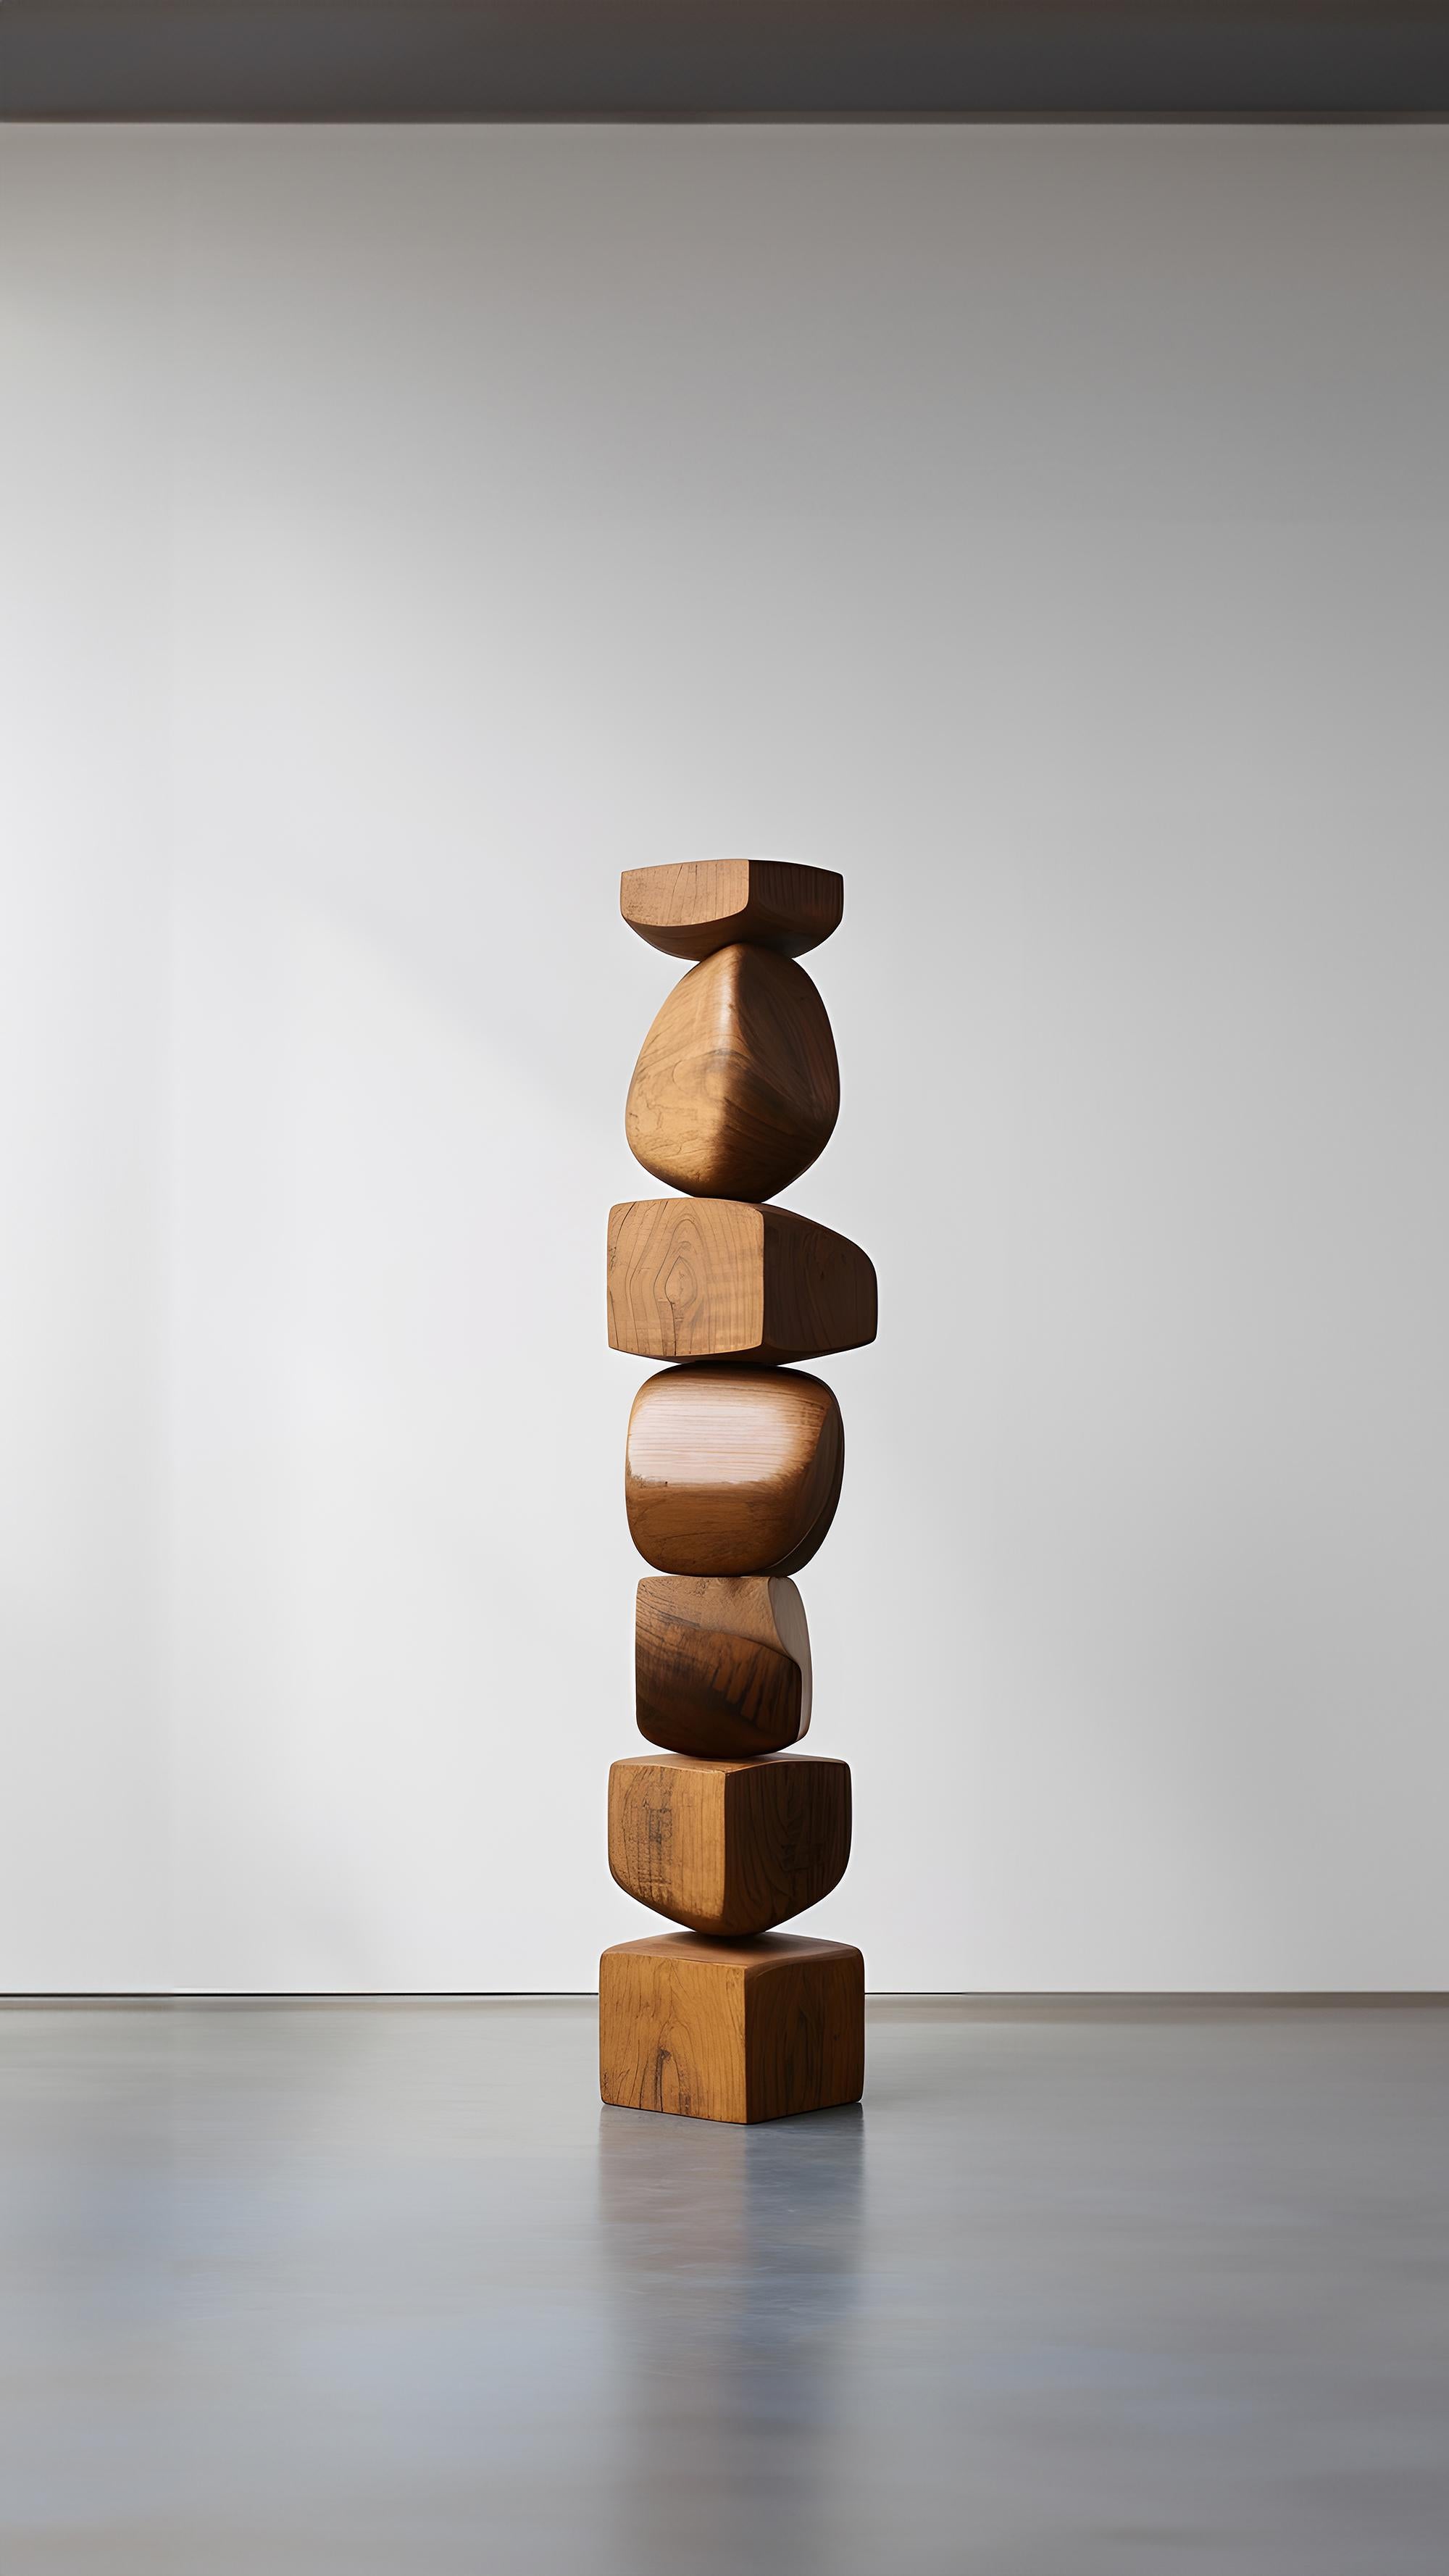 Hand-Crafted Carved Wooden Elegance Still Stand No72: Abstract Totem by Joel Escalona For Sale